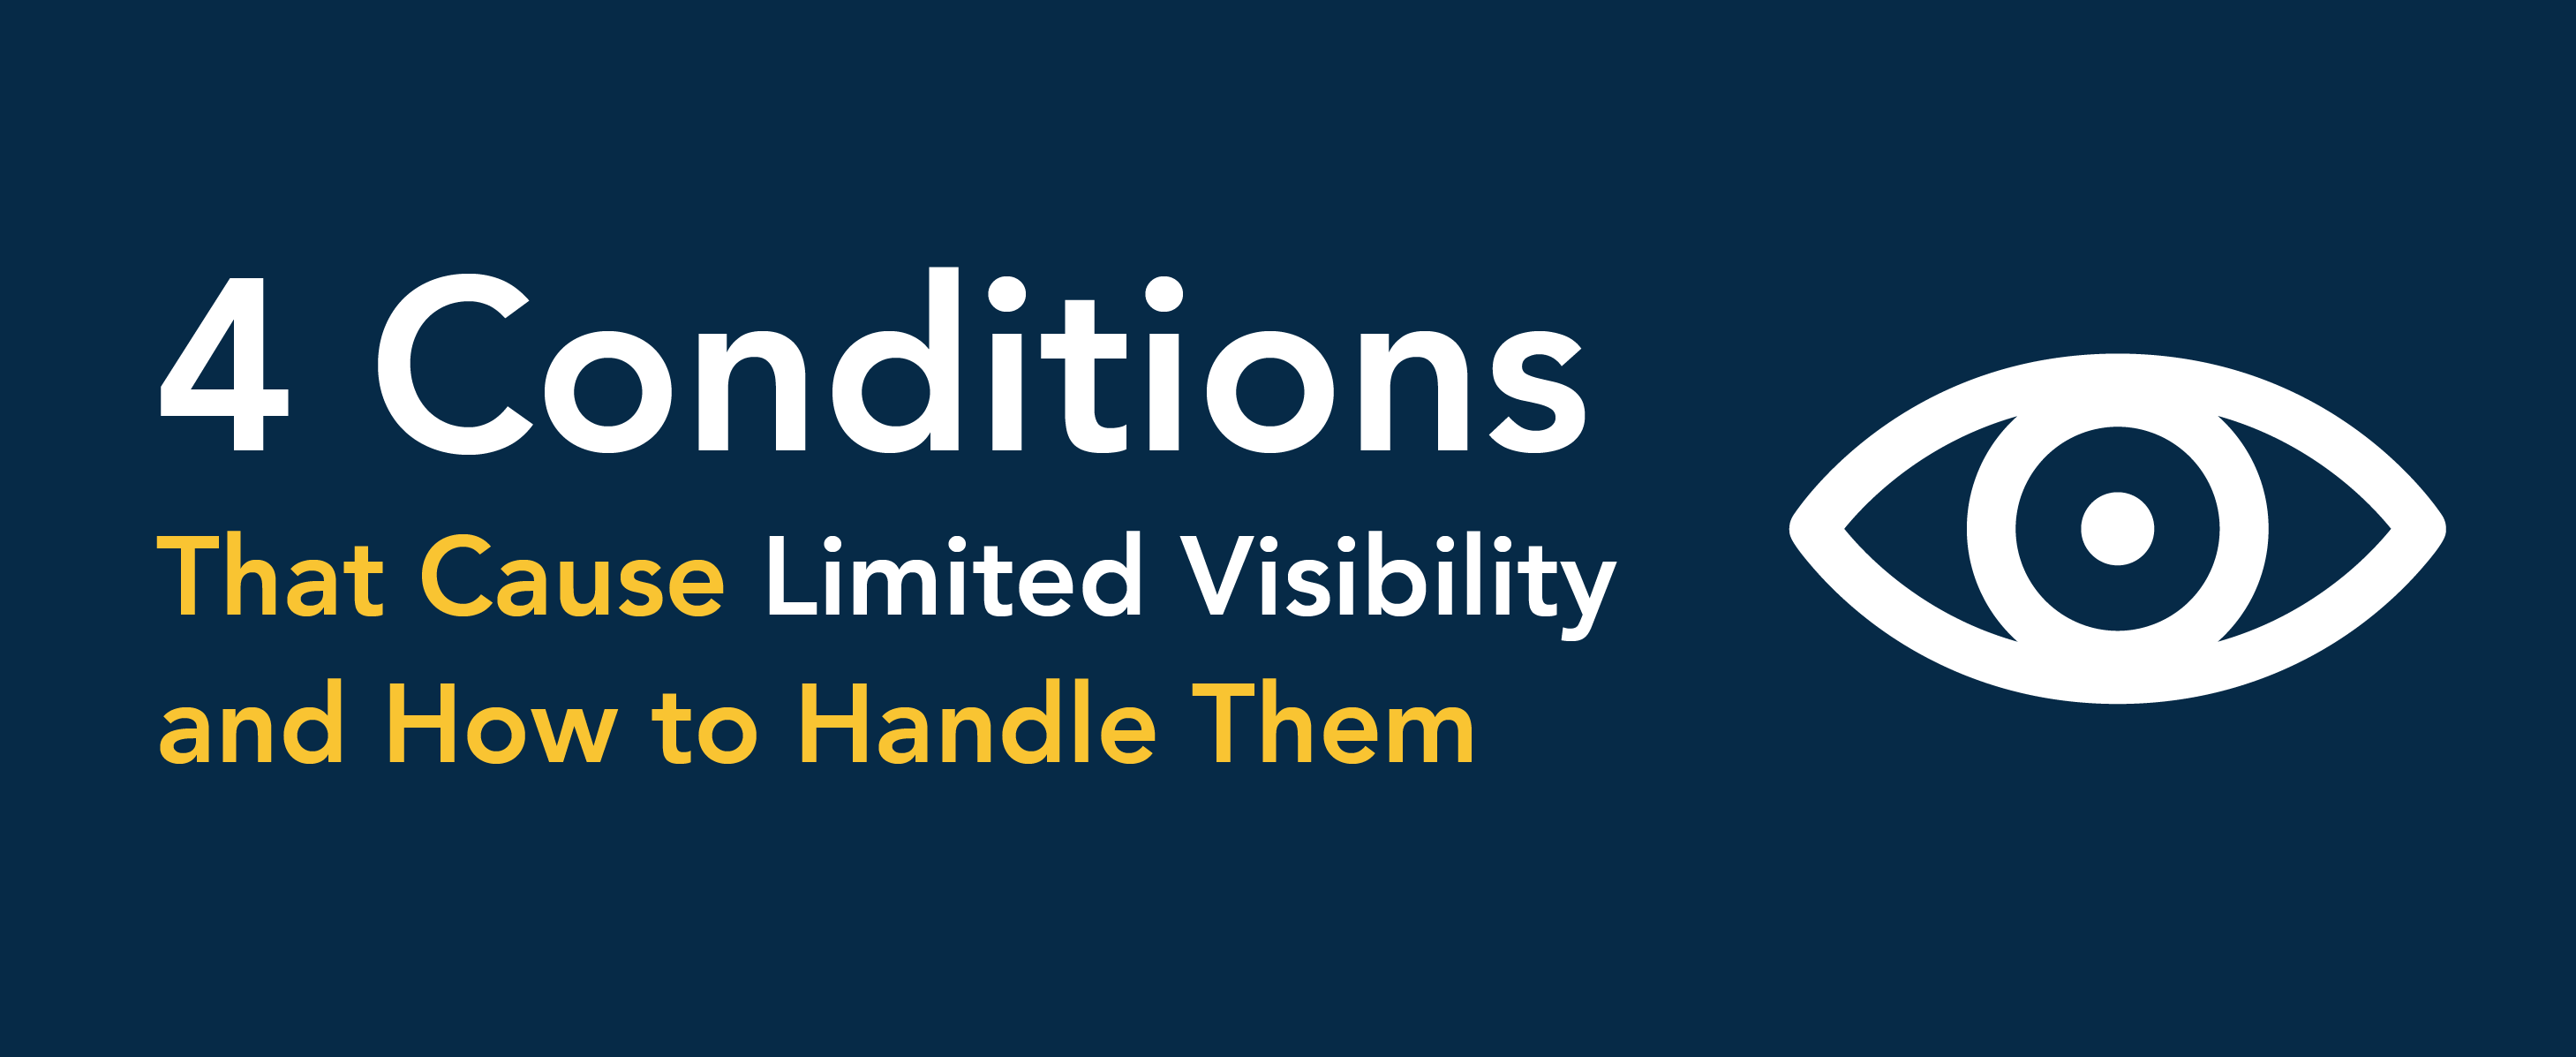 4 conditions that cause limited visibility and how to handle them.